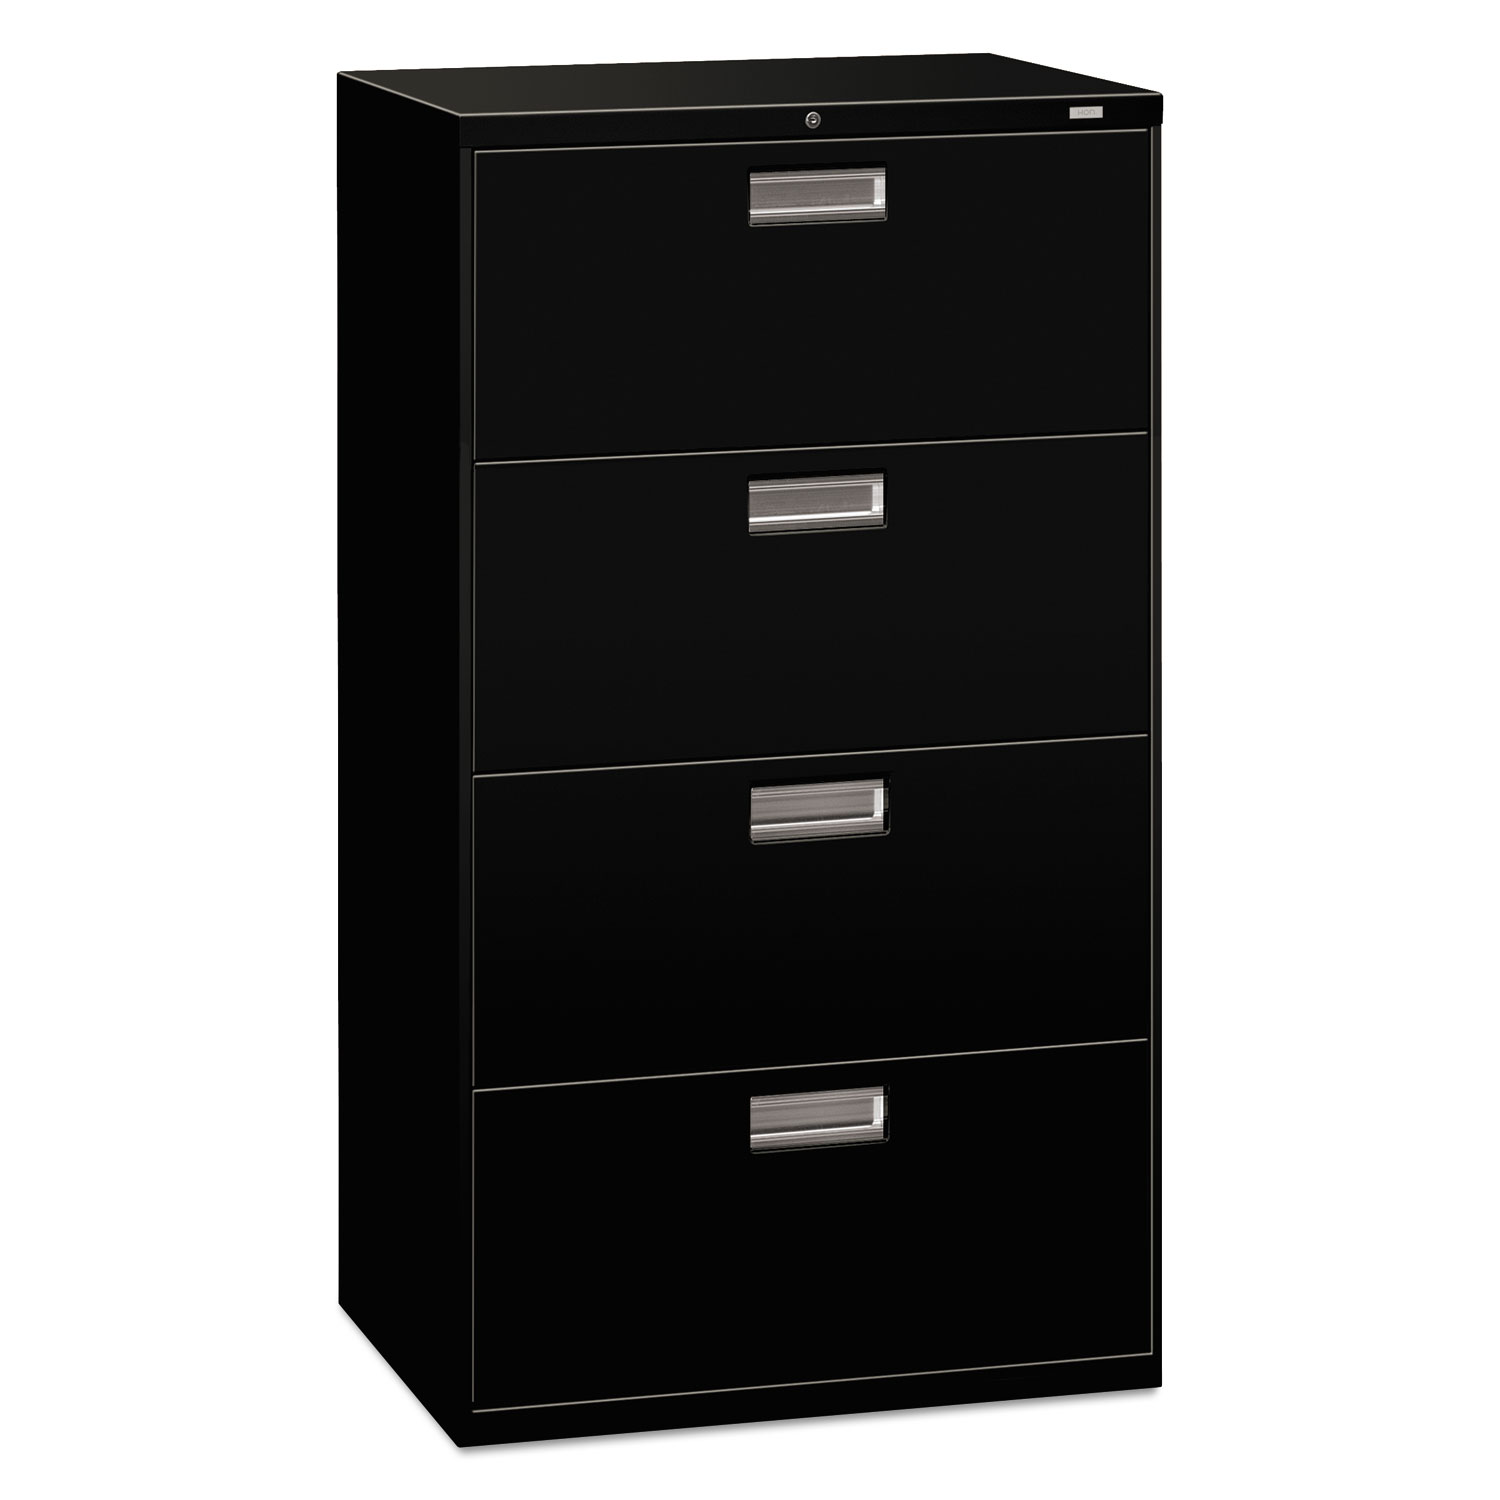 600 Series Four-Drawer Lateral File, 30w x 18d x 52 1/2h, Black